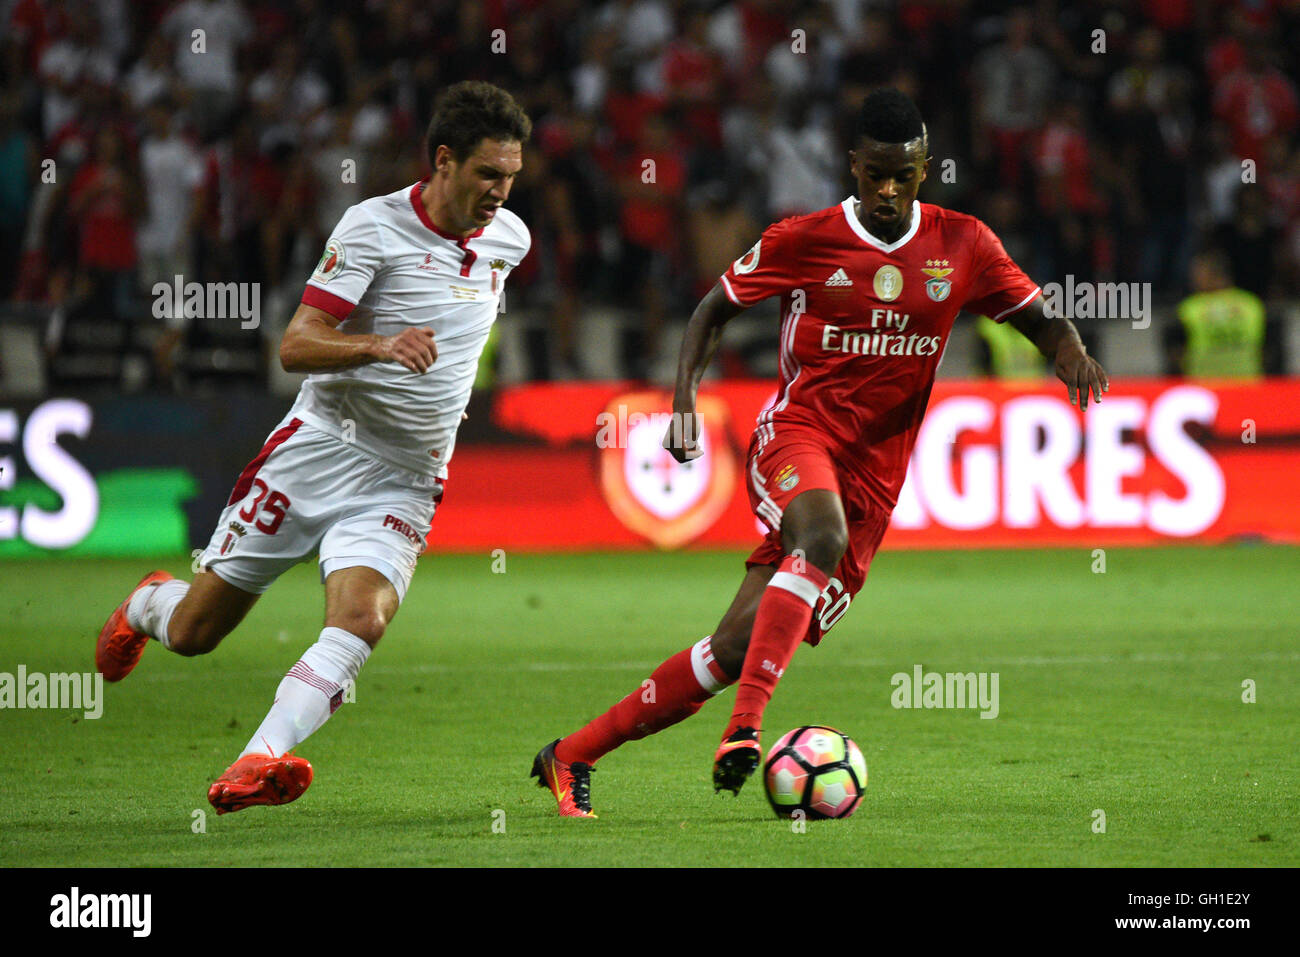 SL Benfica's Nelson Semedo vies for the ball with SC Braga's Vukcevic during the Supertaca Candido Oliveira football match in Aveiro, Portugal Stock Photo